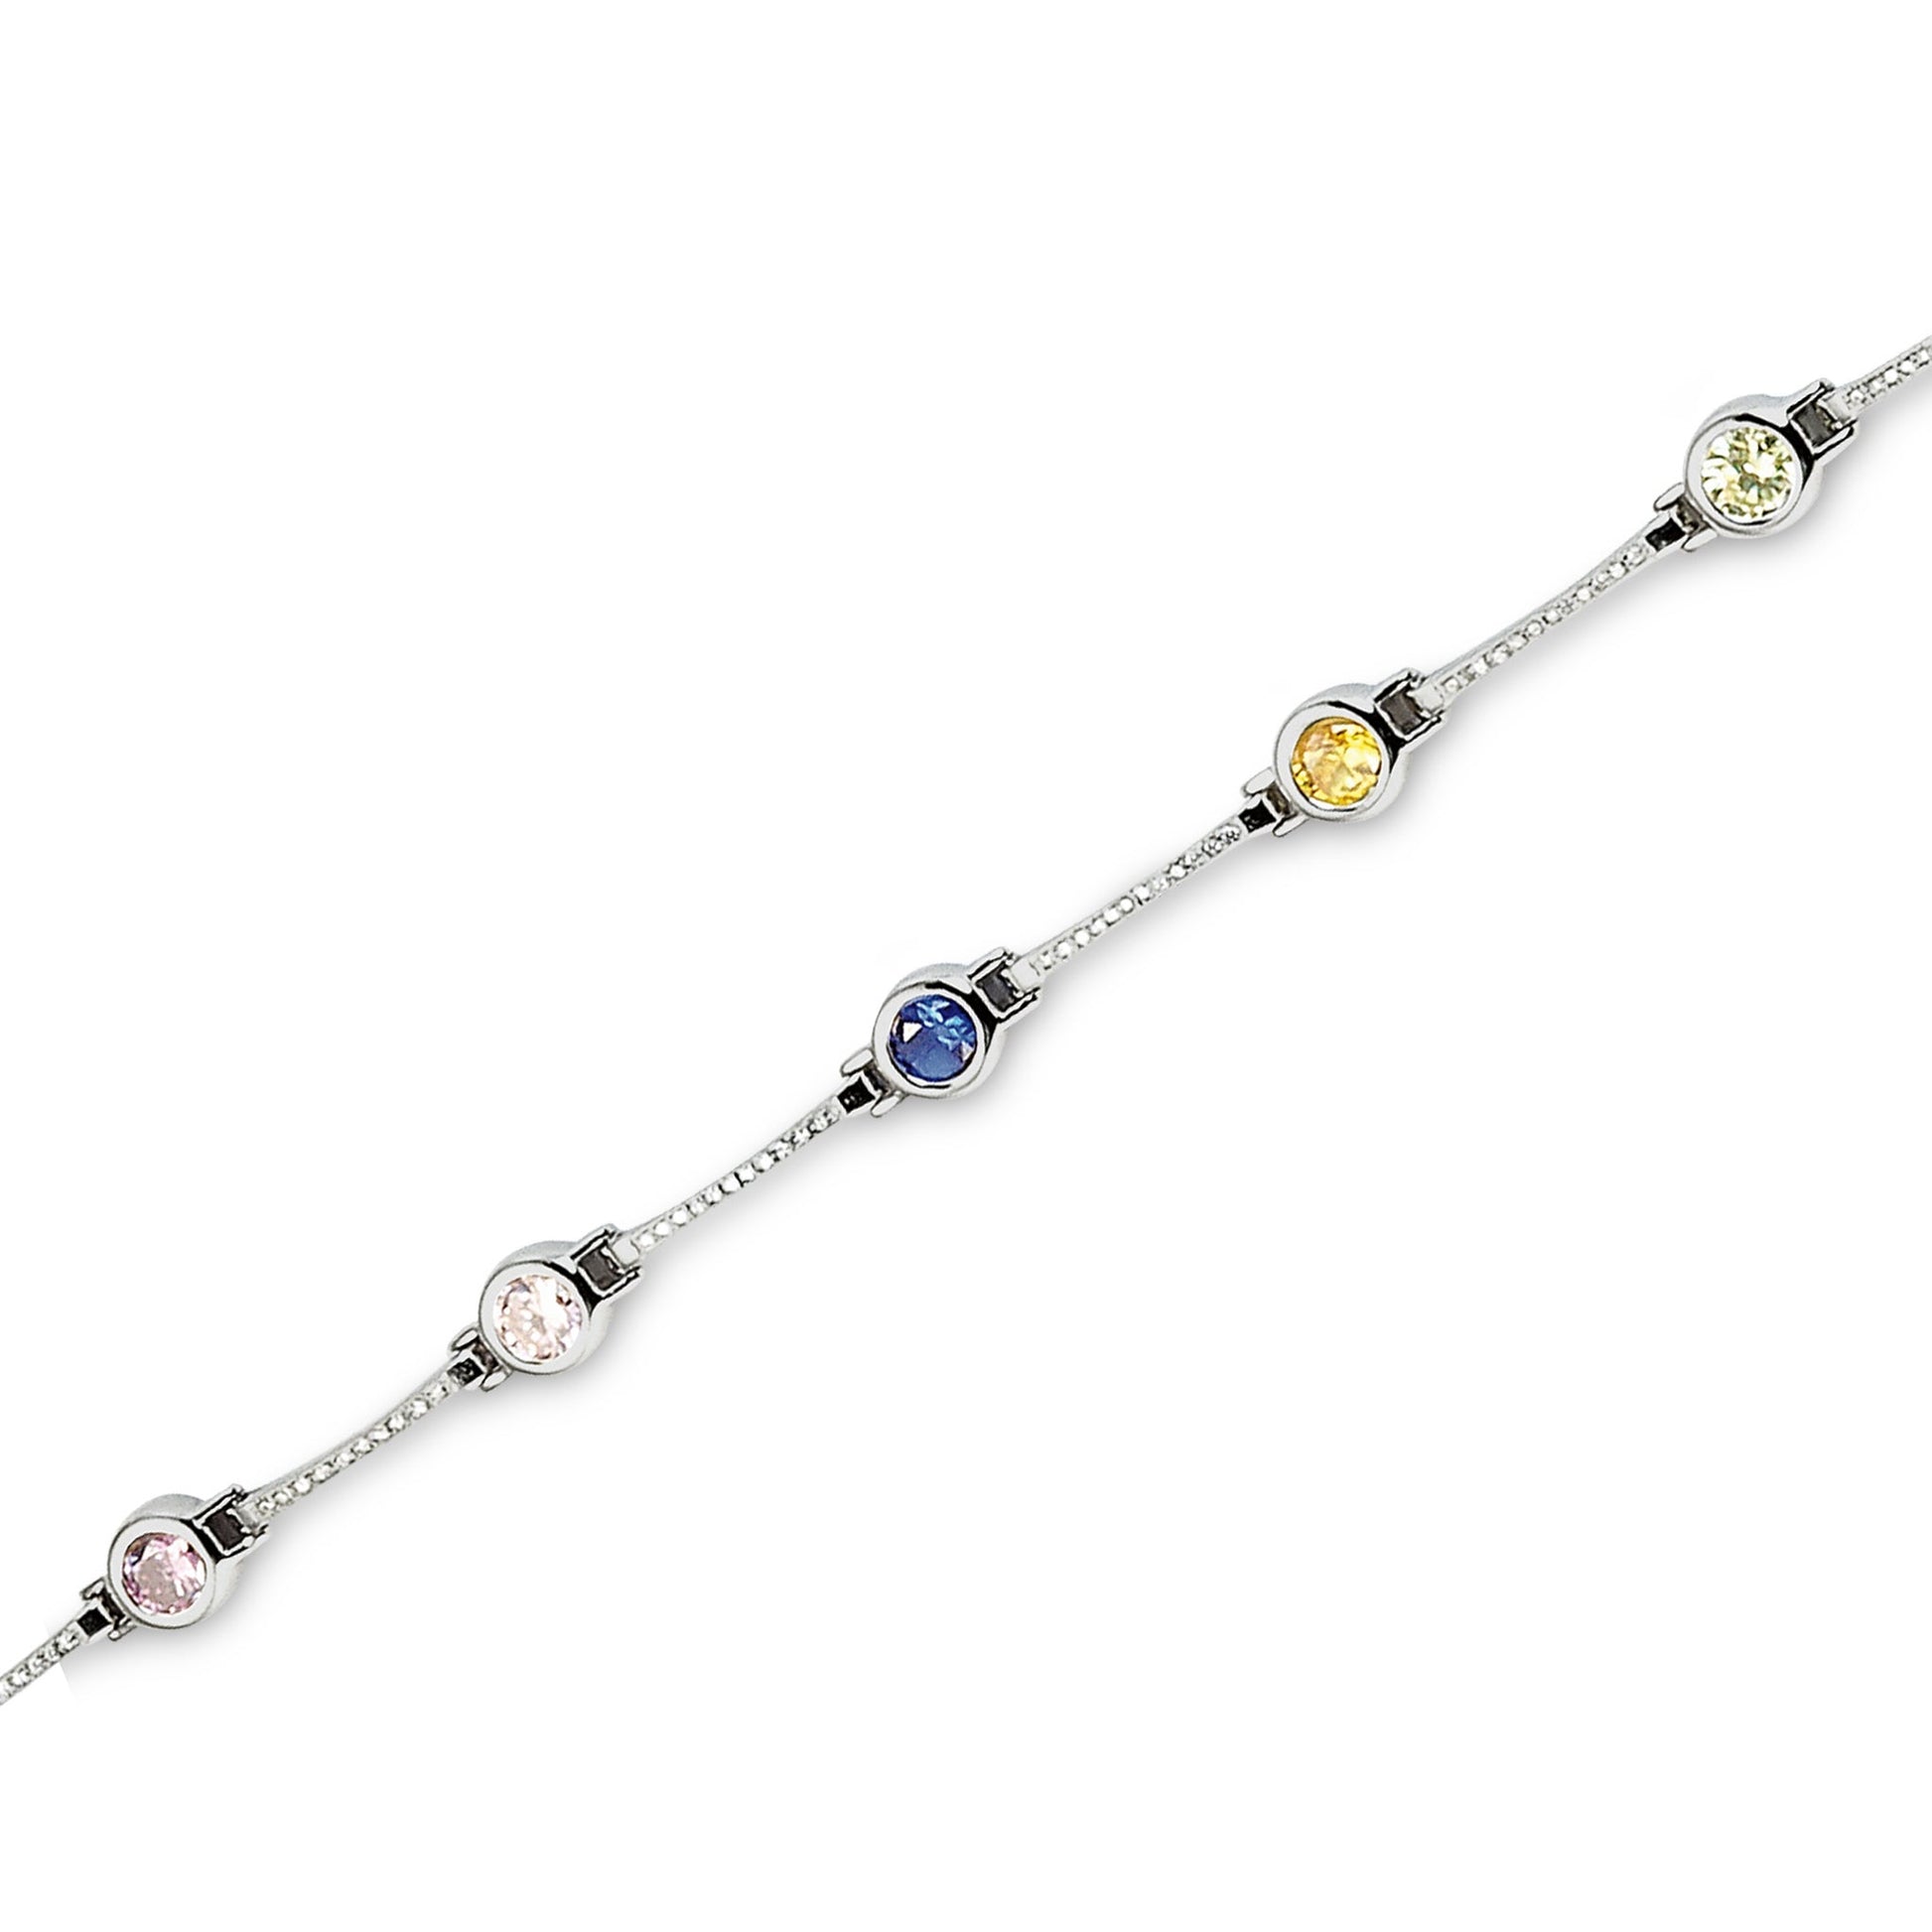 A platinum finished sterling silver bracelet with simulated diamonds and facet cut multicolored stones displayed on a neutral white background.